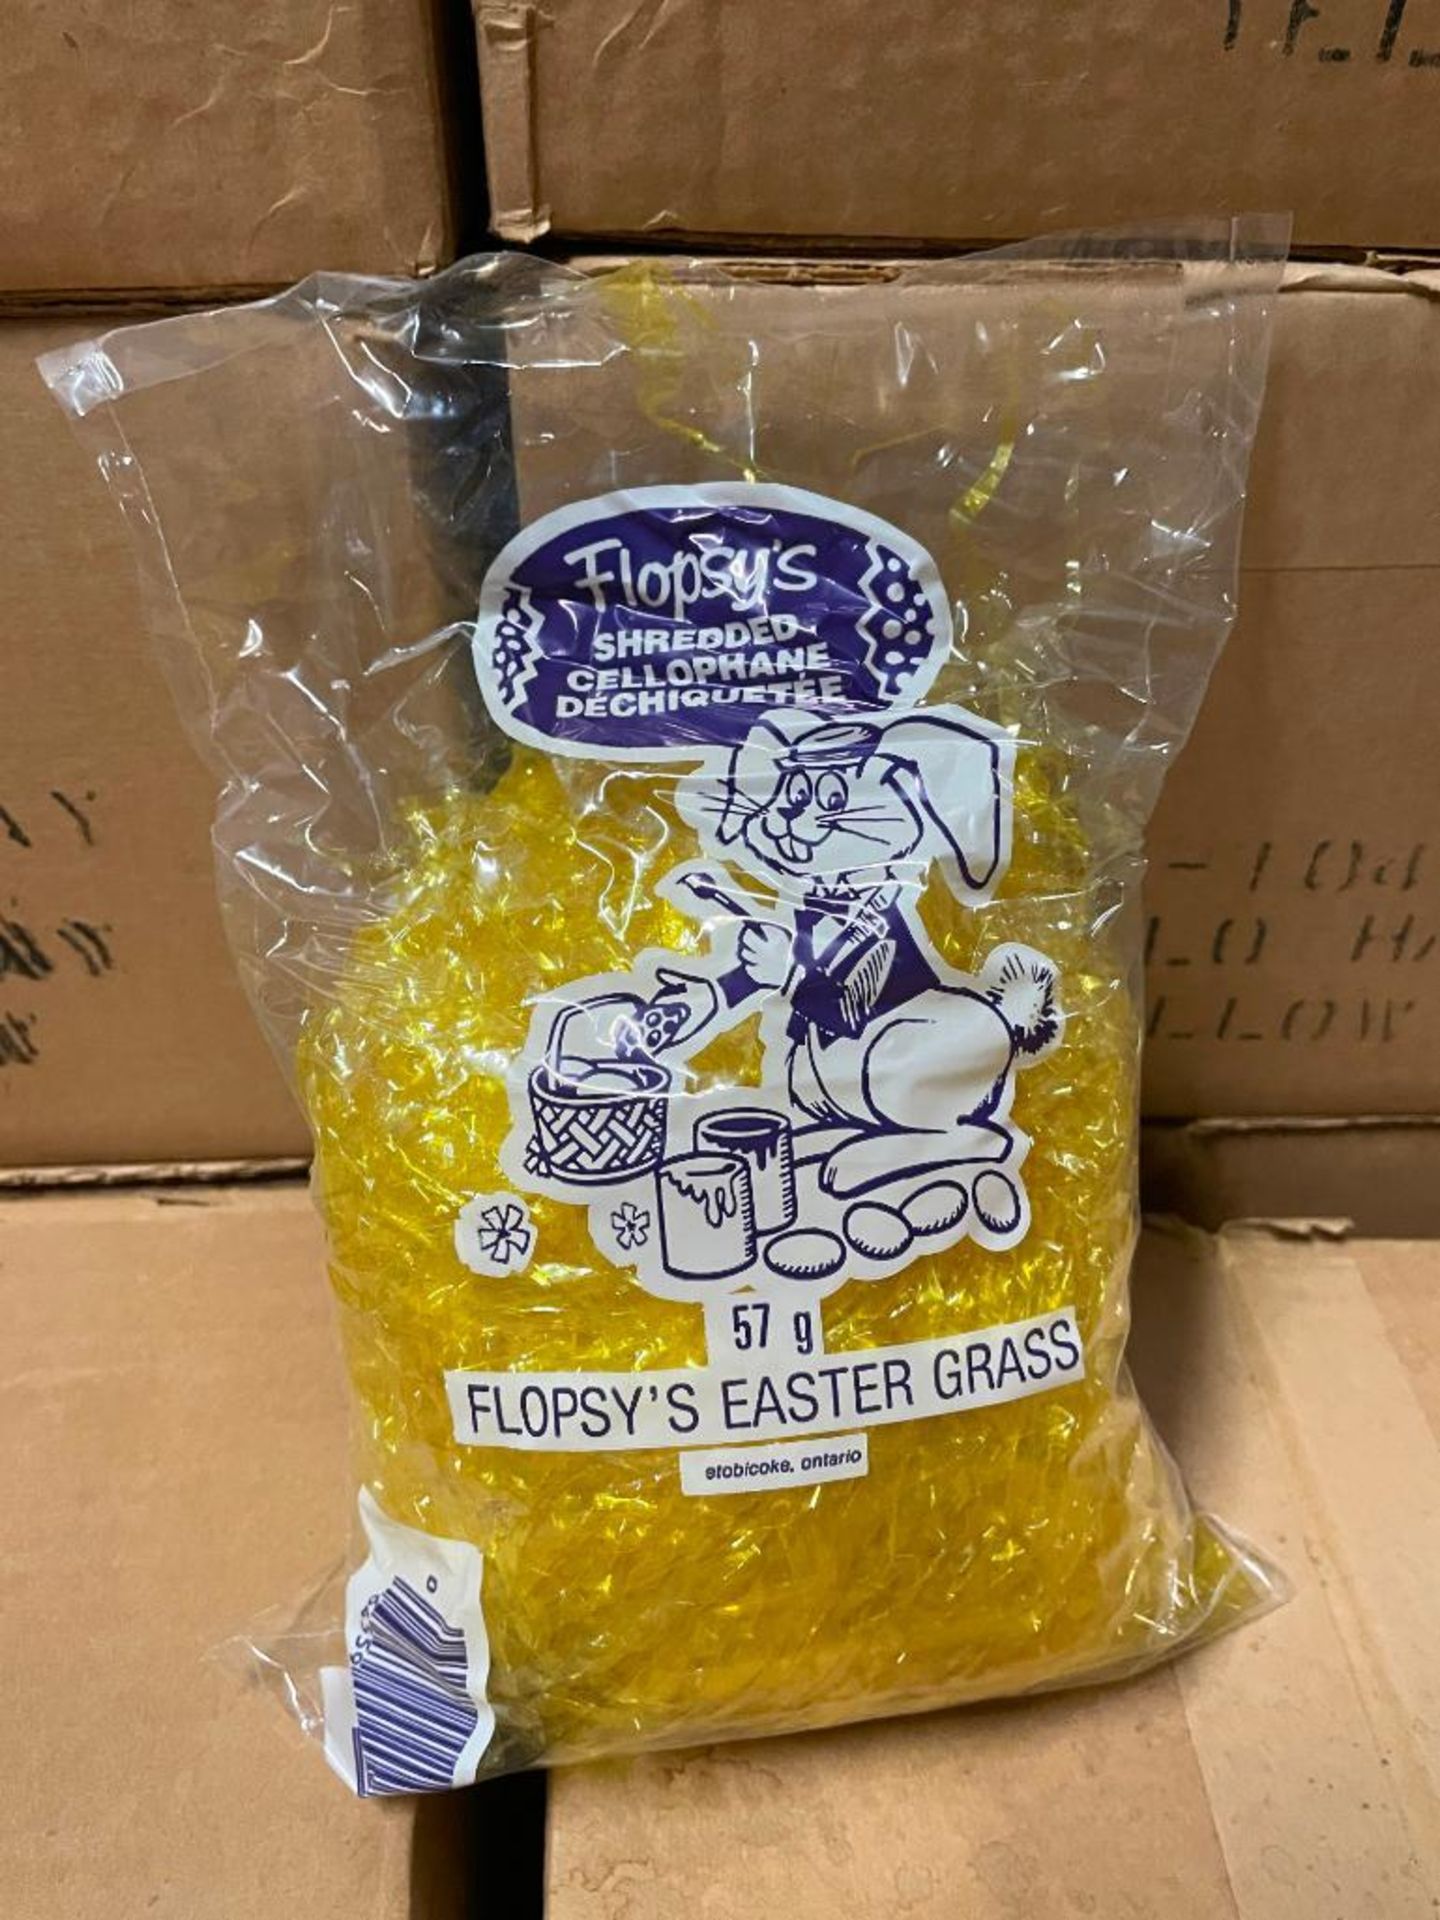 APPROX. (45) BOXES OF FLOPSY'S YELLOW SHREDDED CELLOPHANE EASTER GRASS - Image 3 of 3